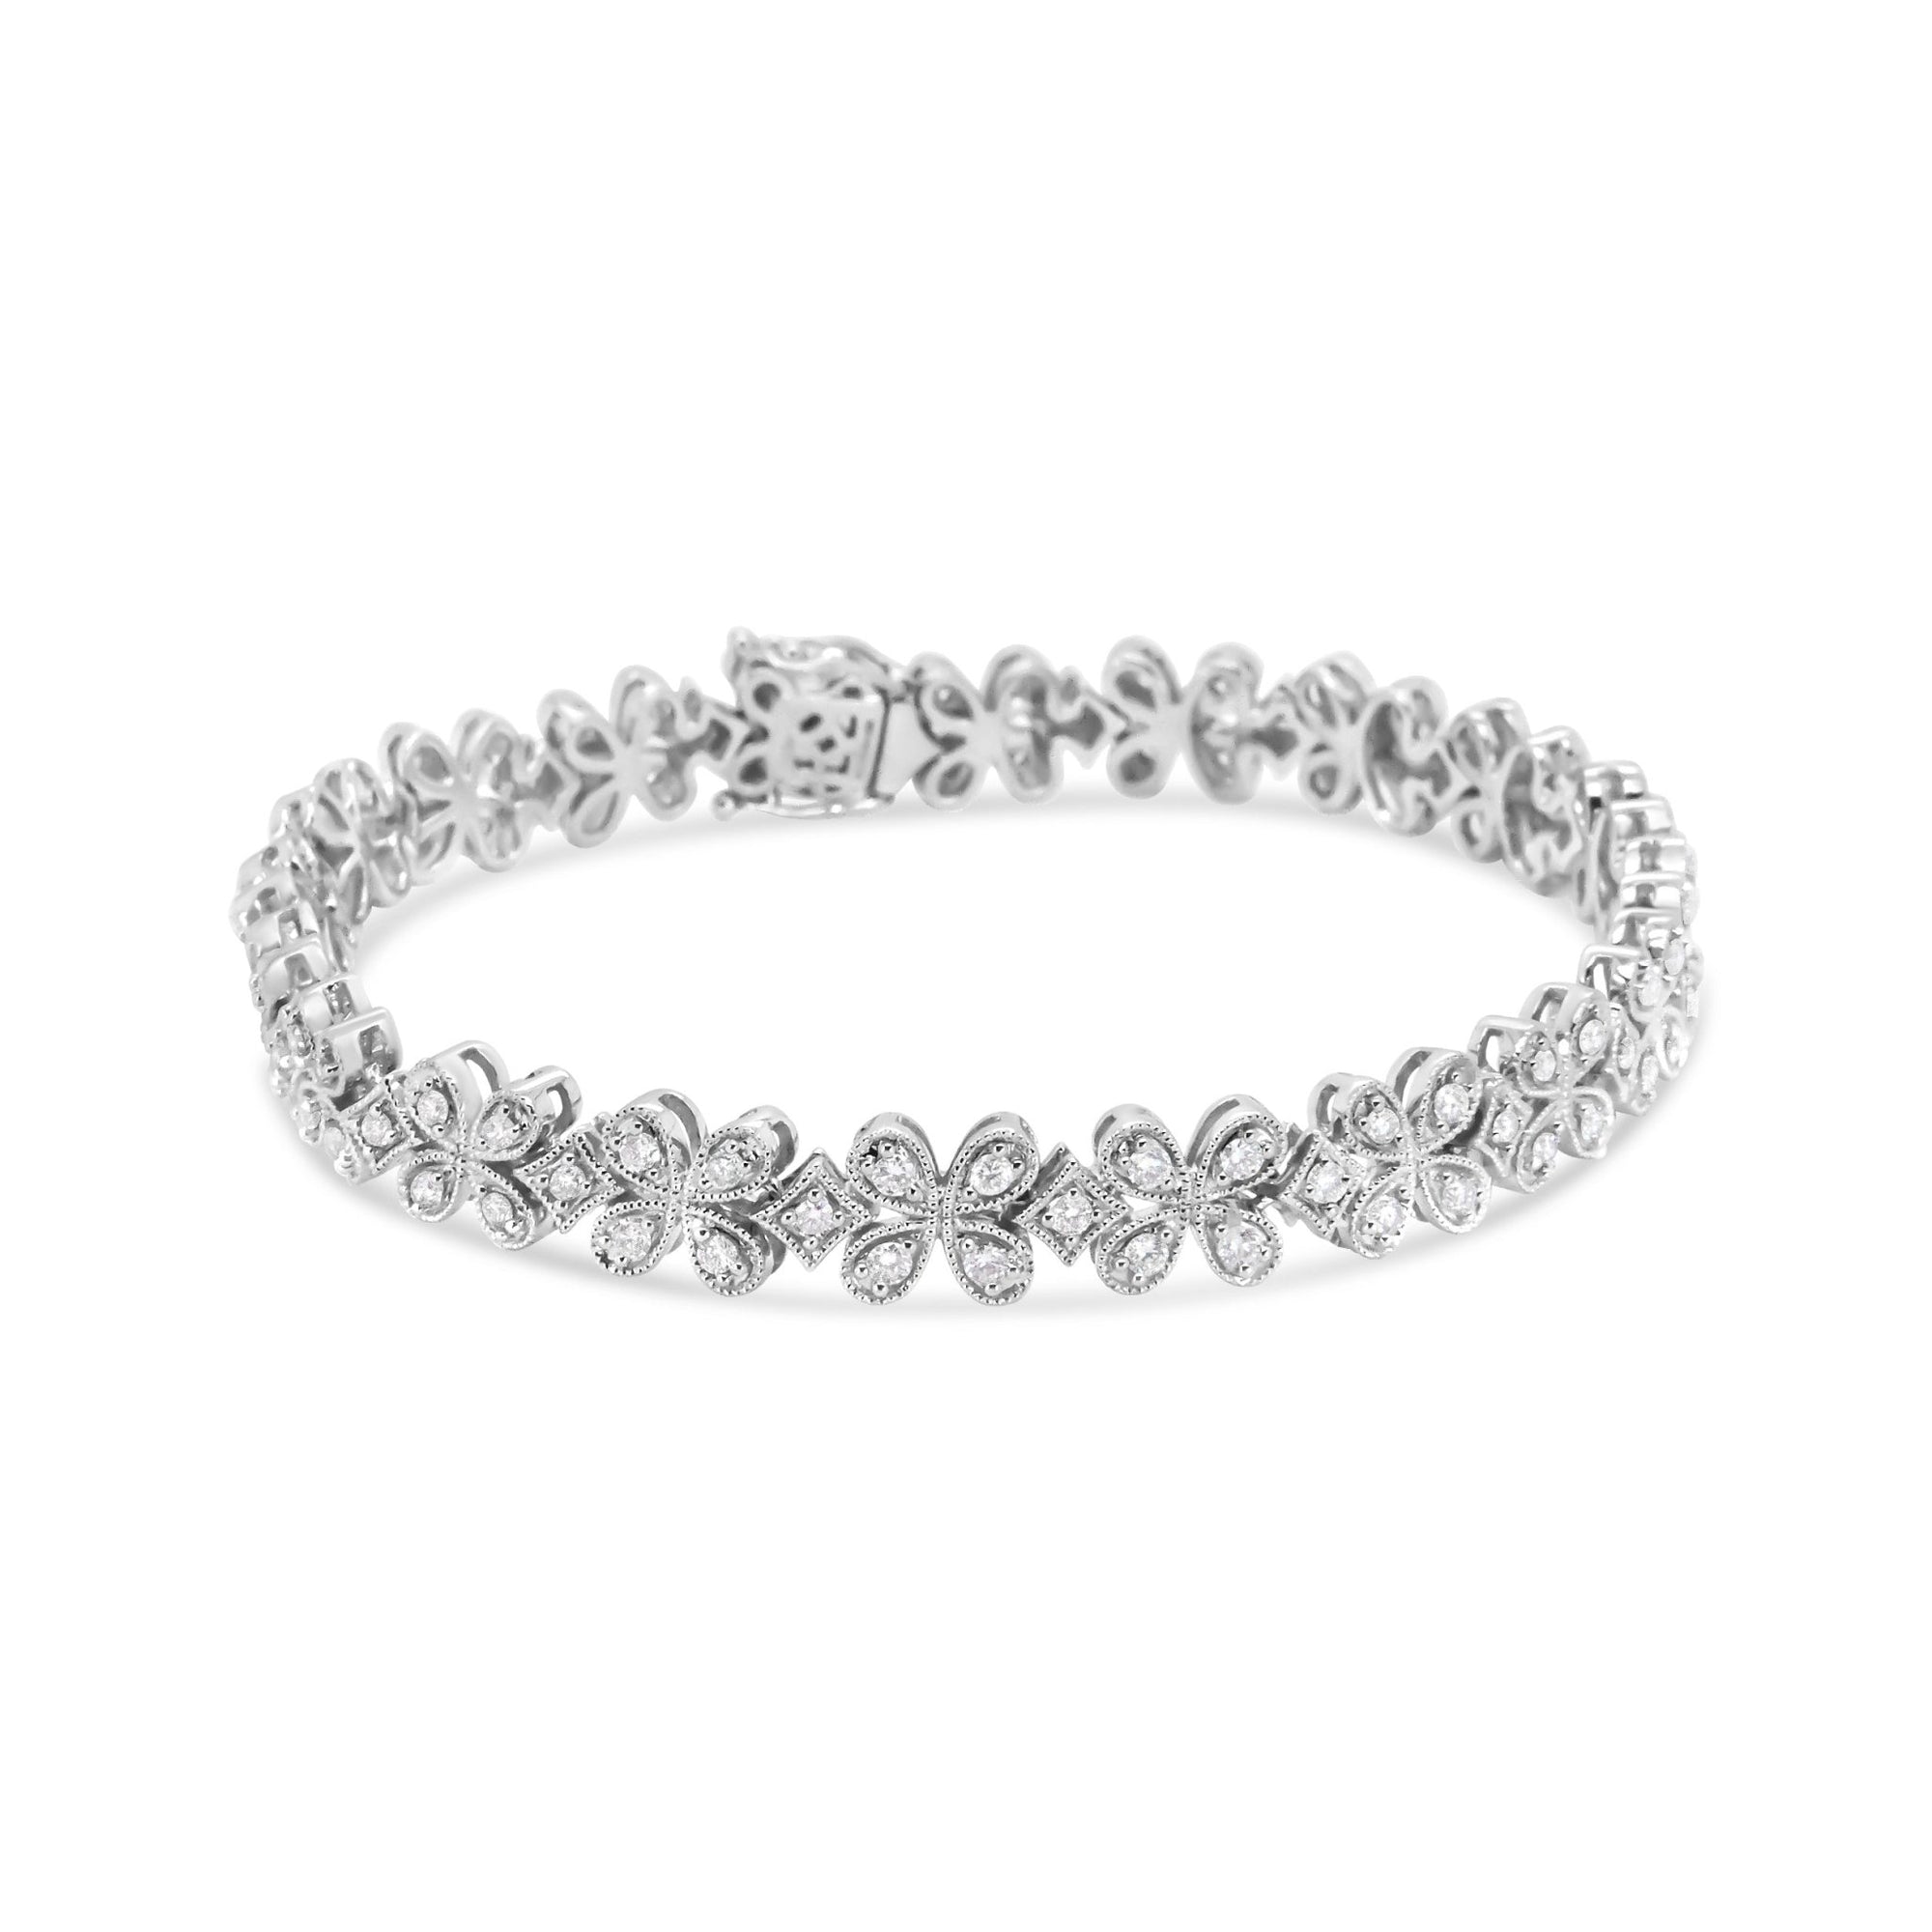 14K White Gold 1 1/2 Cttw Round Diamond Floral Clover-Shaped Link Bracelet (H-I Color, SI1-SI2 Clarity) - Size 7" - LinkagejewelrydesignLinkagejewelrydesign